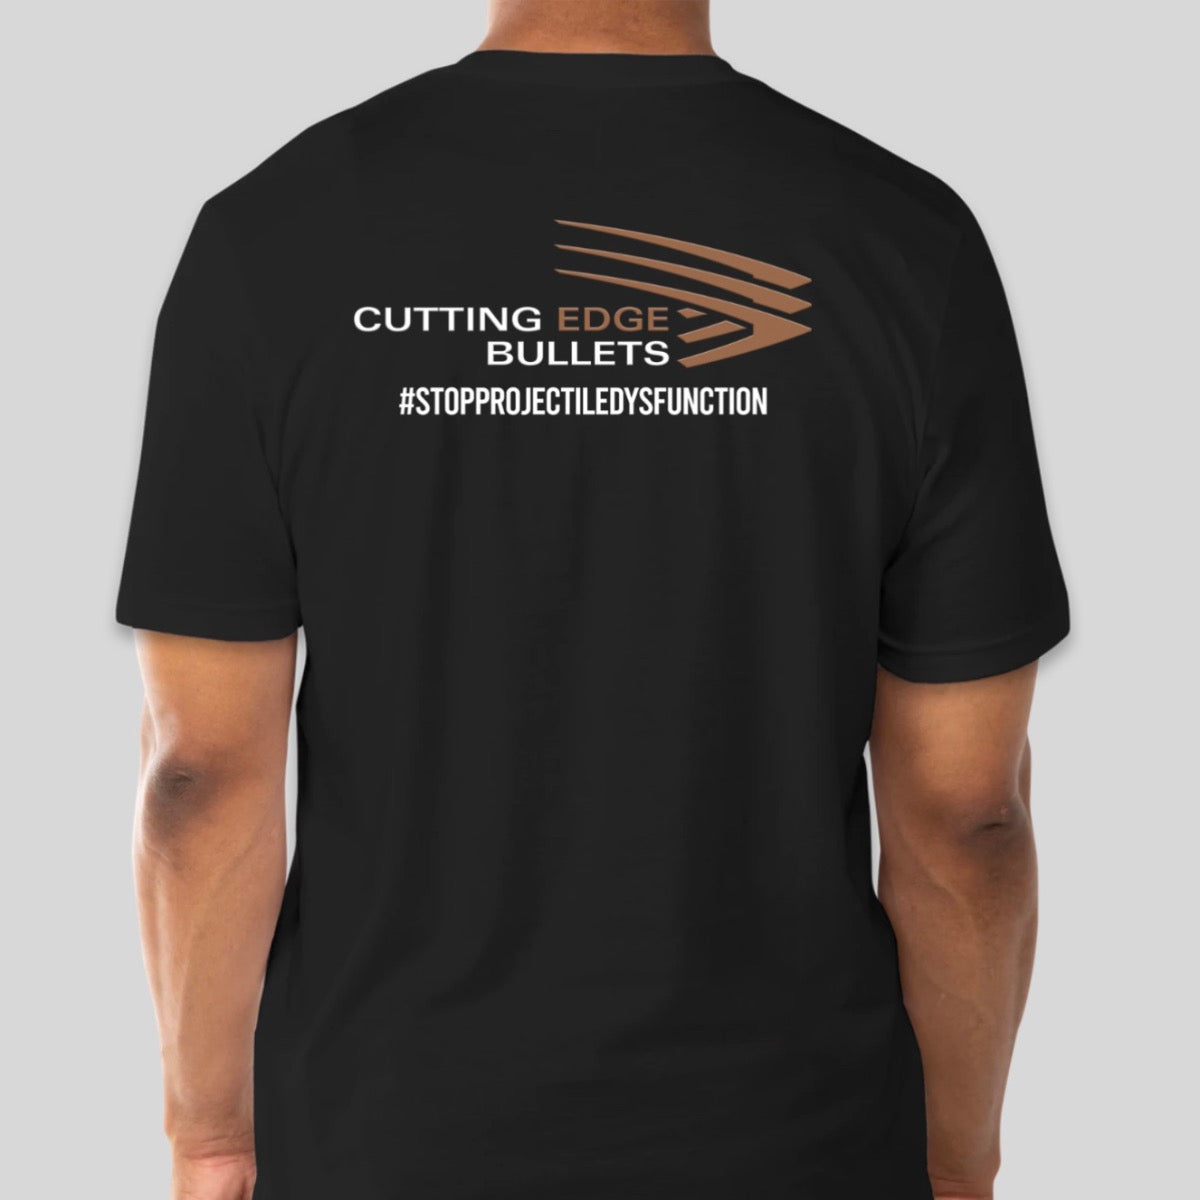 CEB white and copper logo with "#stopprojectiledysfunction" on back center